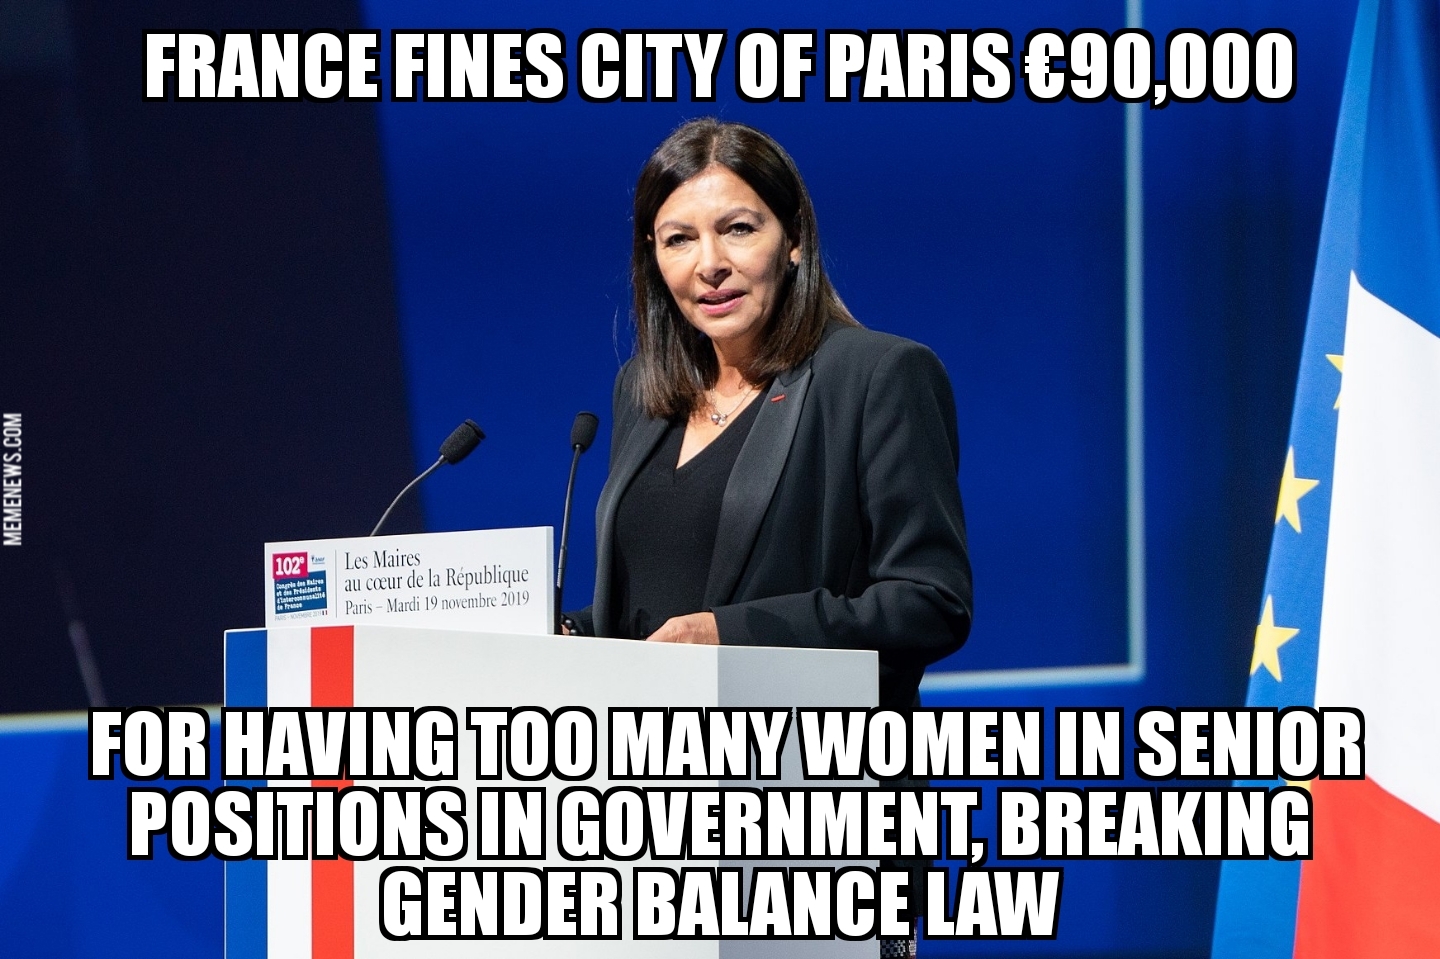 City of Paris fined for having too many women